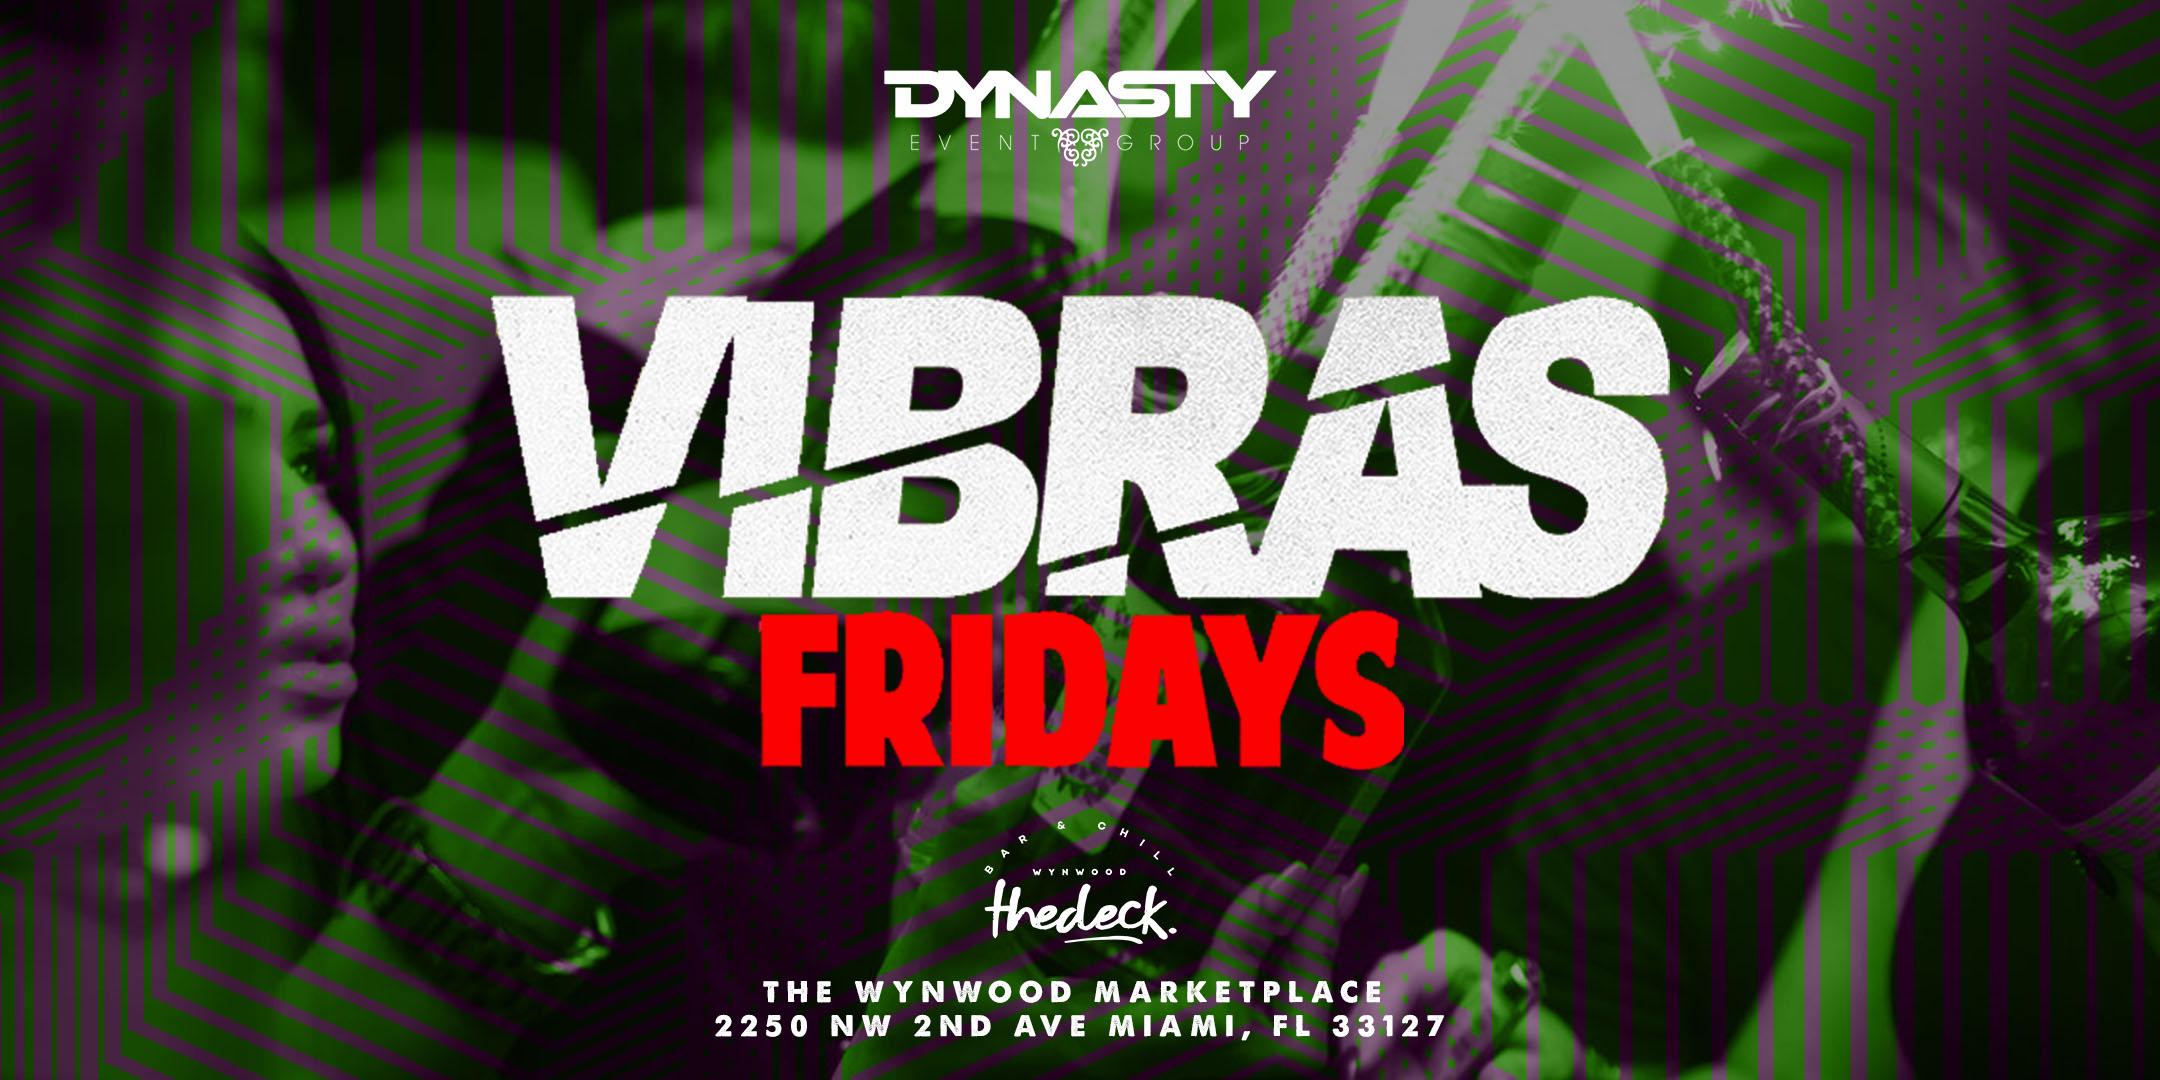 Vibras Fridays at thedeck in the Wynwood Marketplace